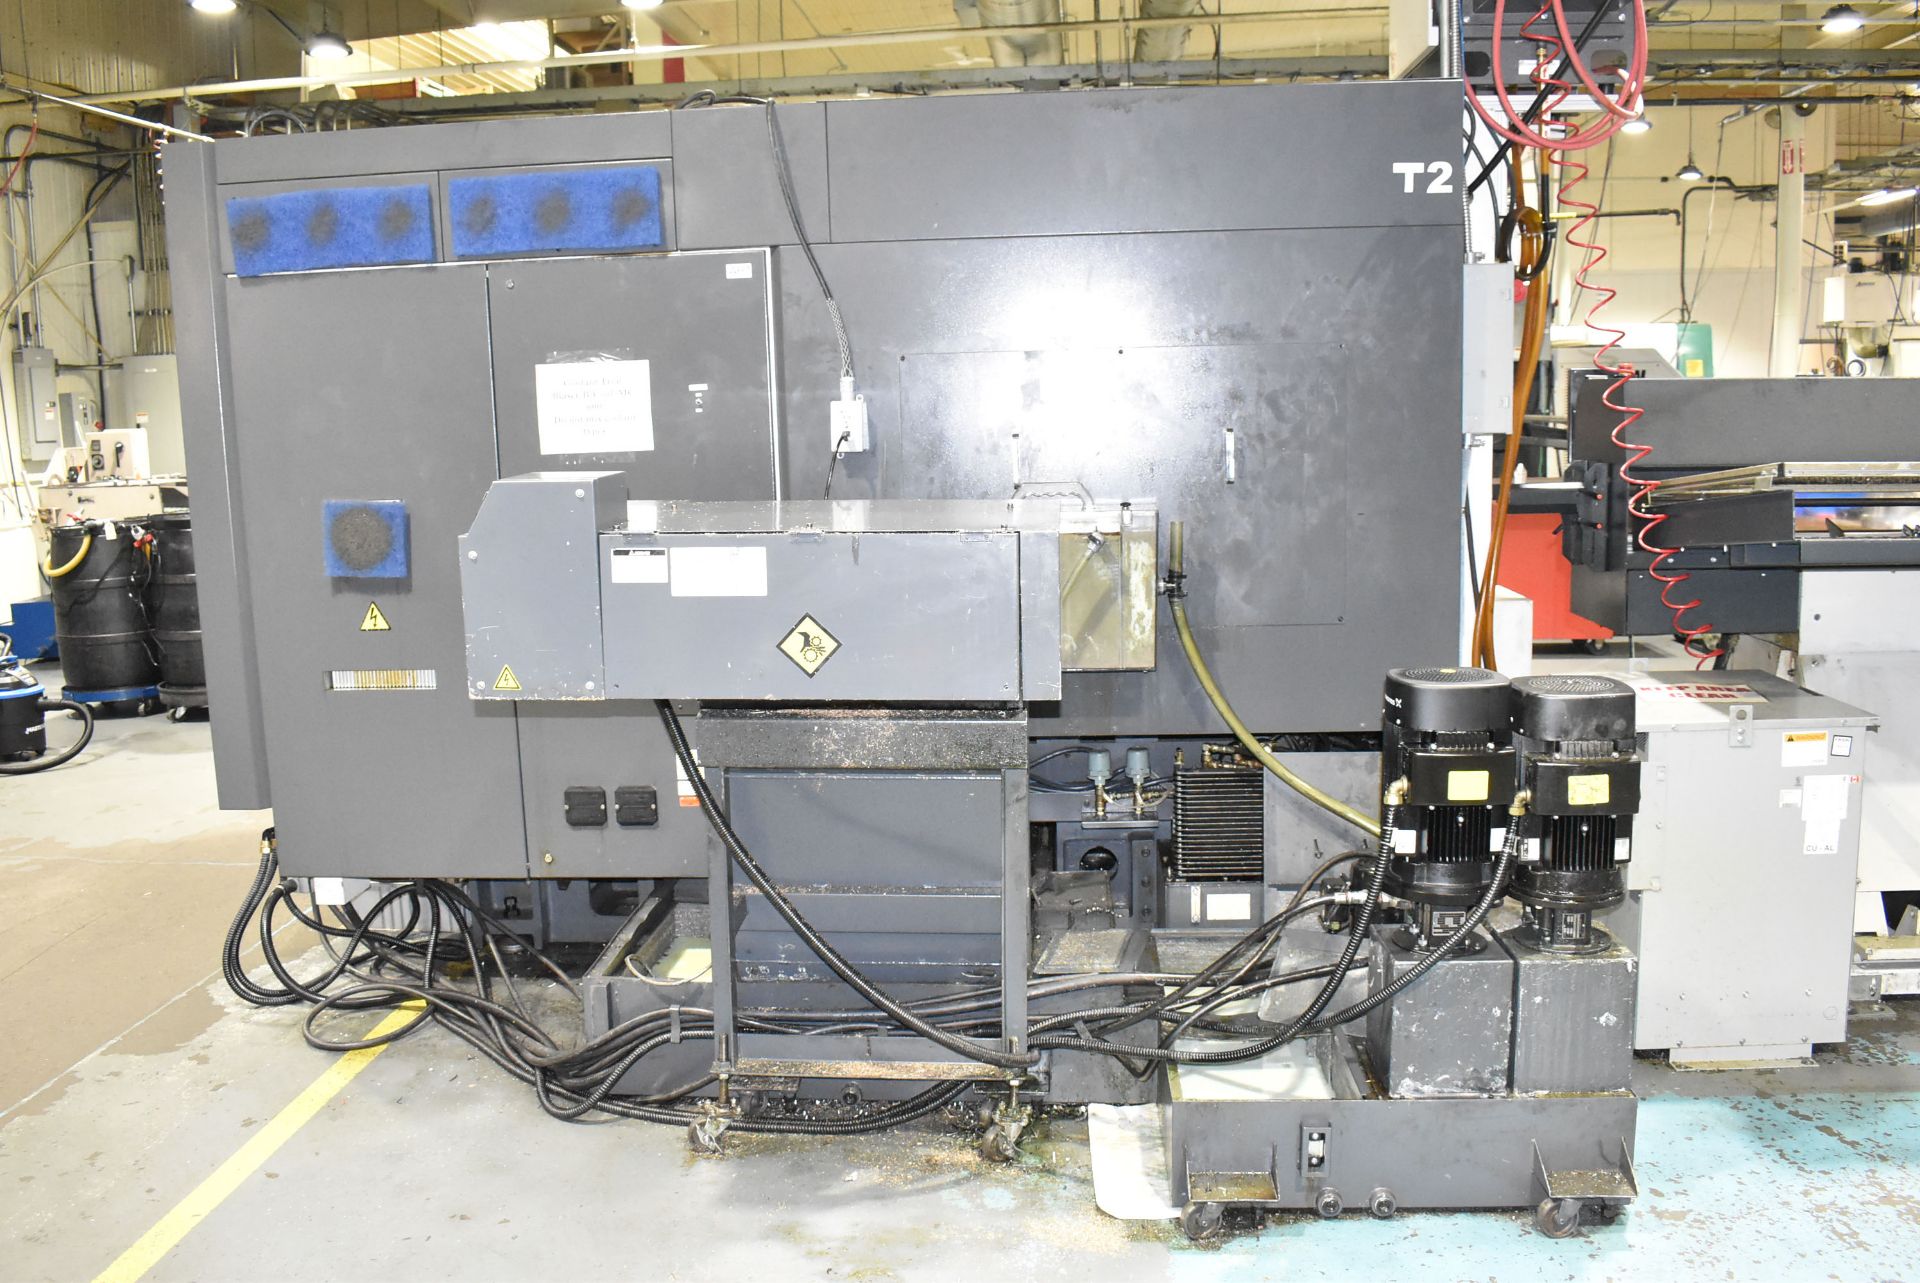 NAKAMURA-TOME (2013) WT-250 II S MULTI-AXIS OPPOSED SPINDLE AND TWIN TURRET CNC MULTI-TASKING CENTER - Image 10 of 15